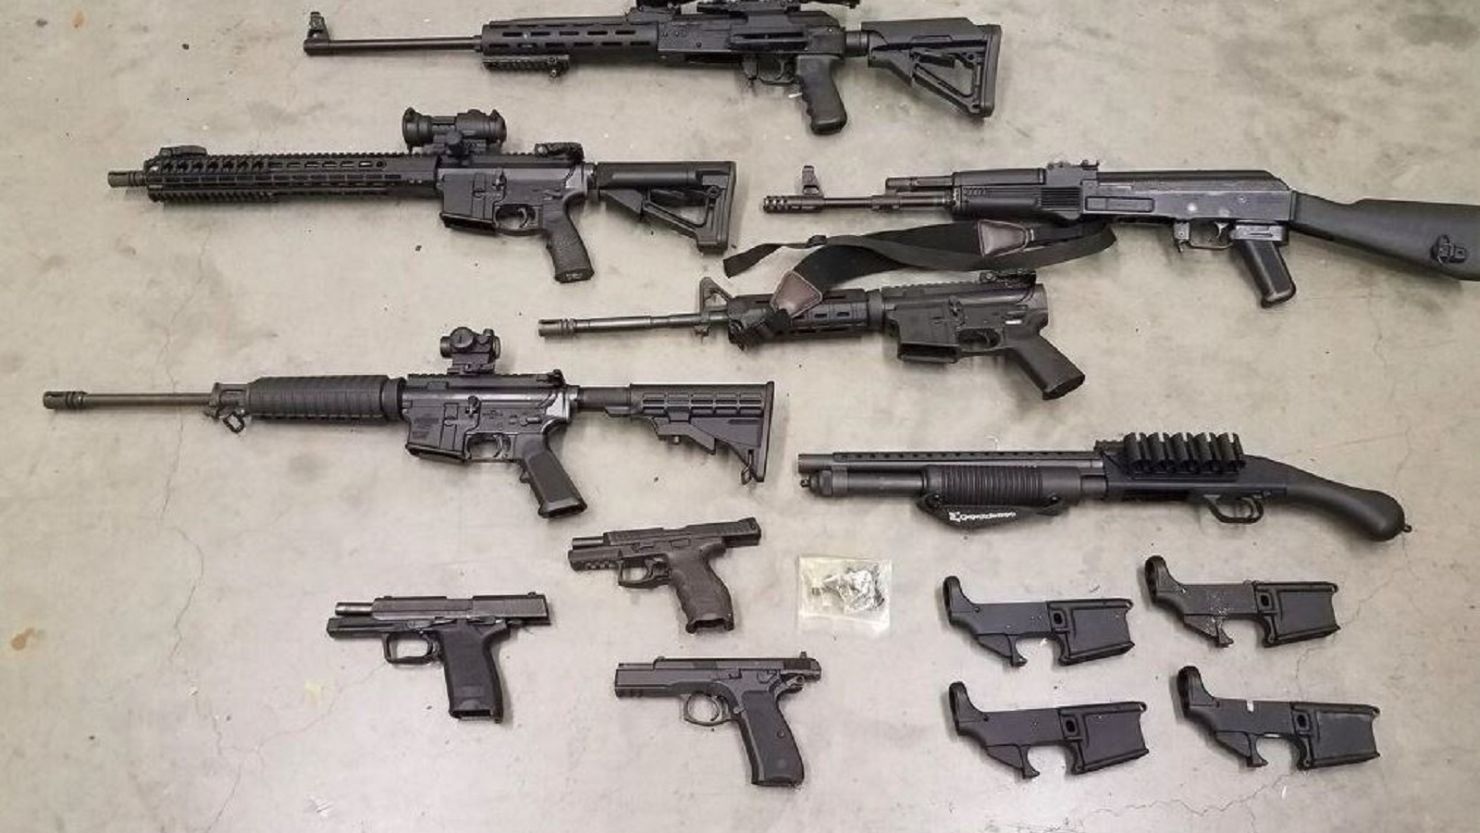 The Seattle Police filed a petition and seized a small cache of firearms and gun parts from the home of  Kaleb James Cole, according to court documents.